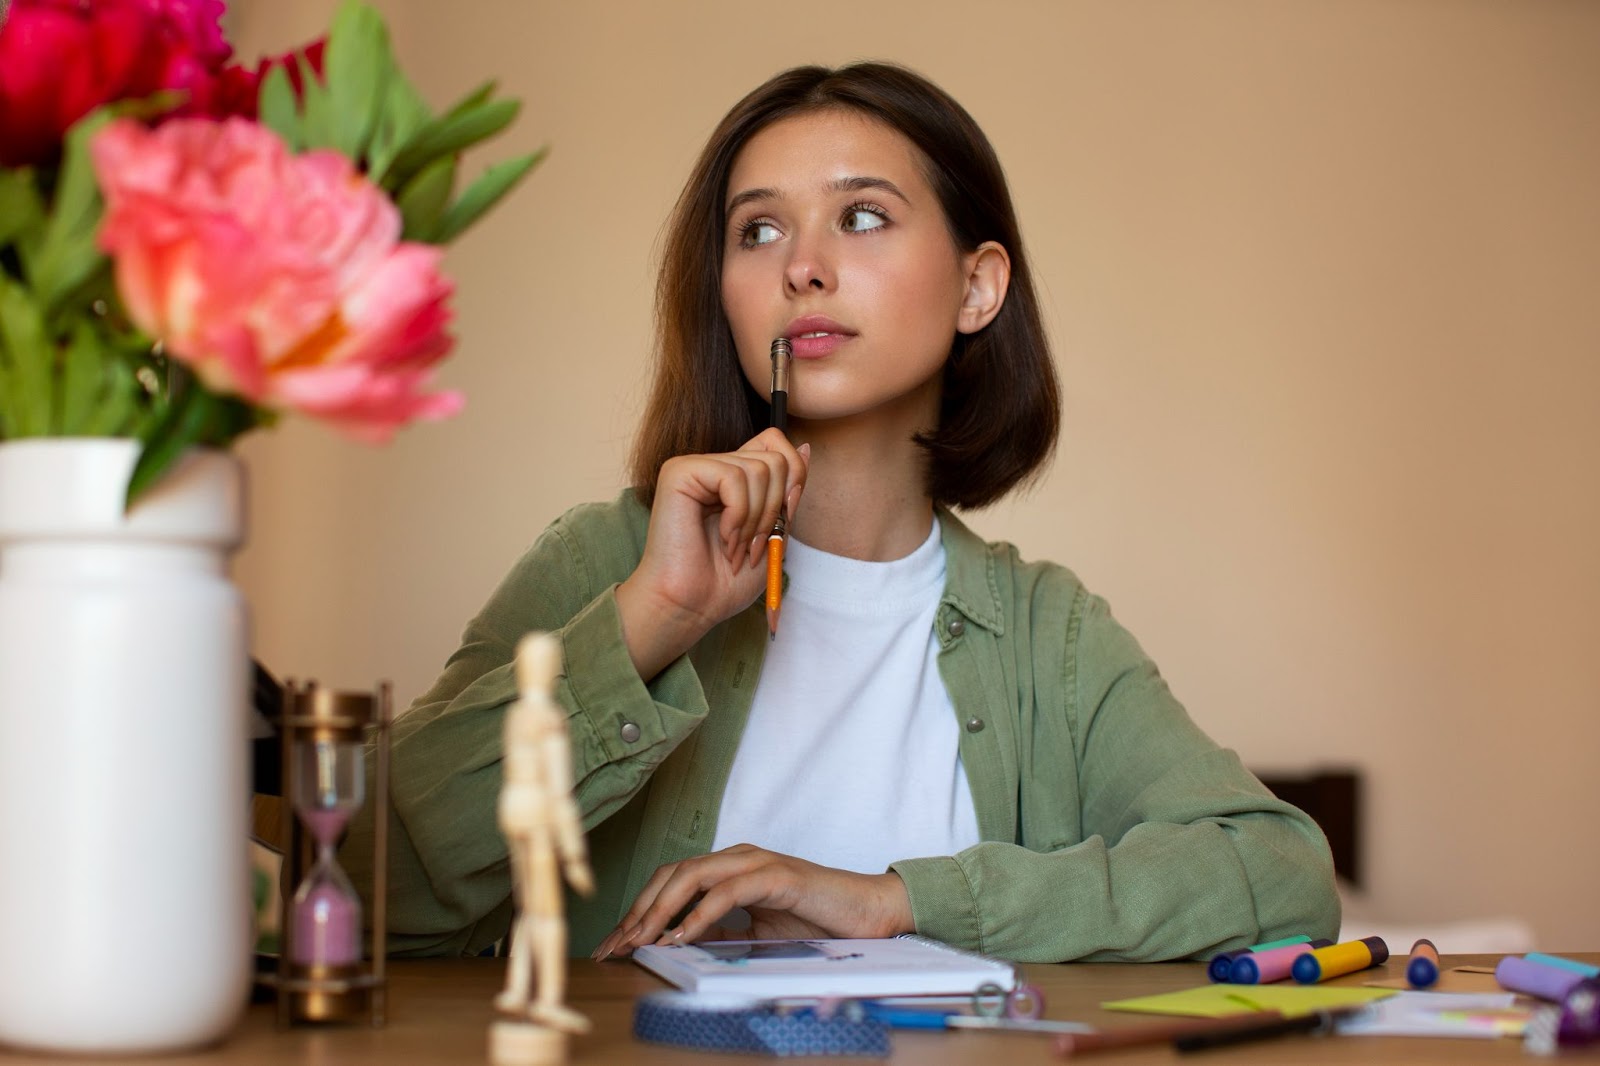 A young woman in a relaxed event planning space, deep in thought while surrounded by objects that suggest a creative brainstorming session. The prominent display of peonies and a classic hourglass on her desk add to the aesthetic of the event space, where ideas for festivities are likely being conceptualized and organized